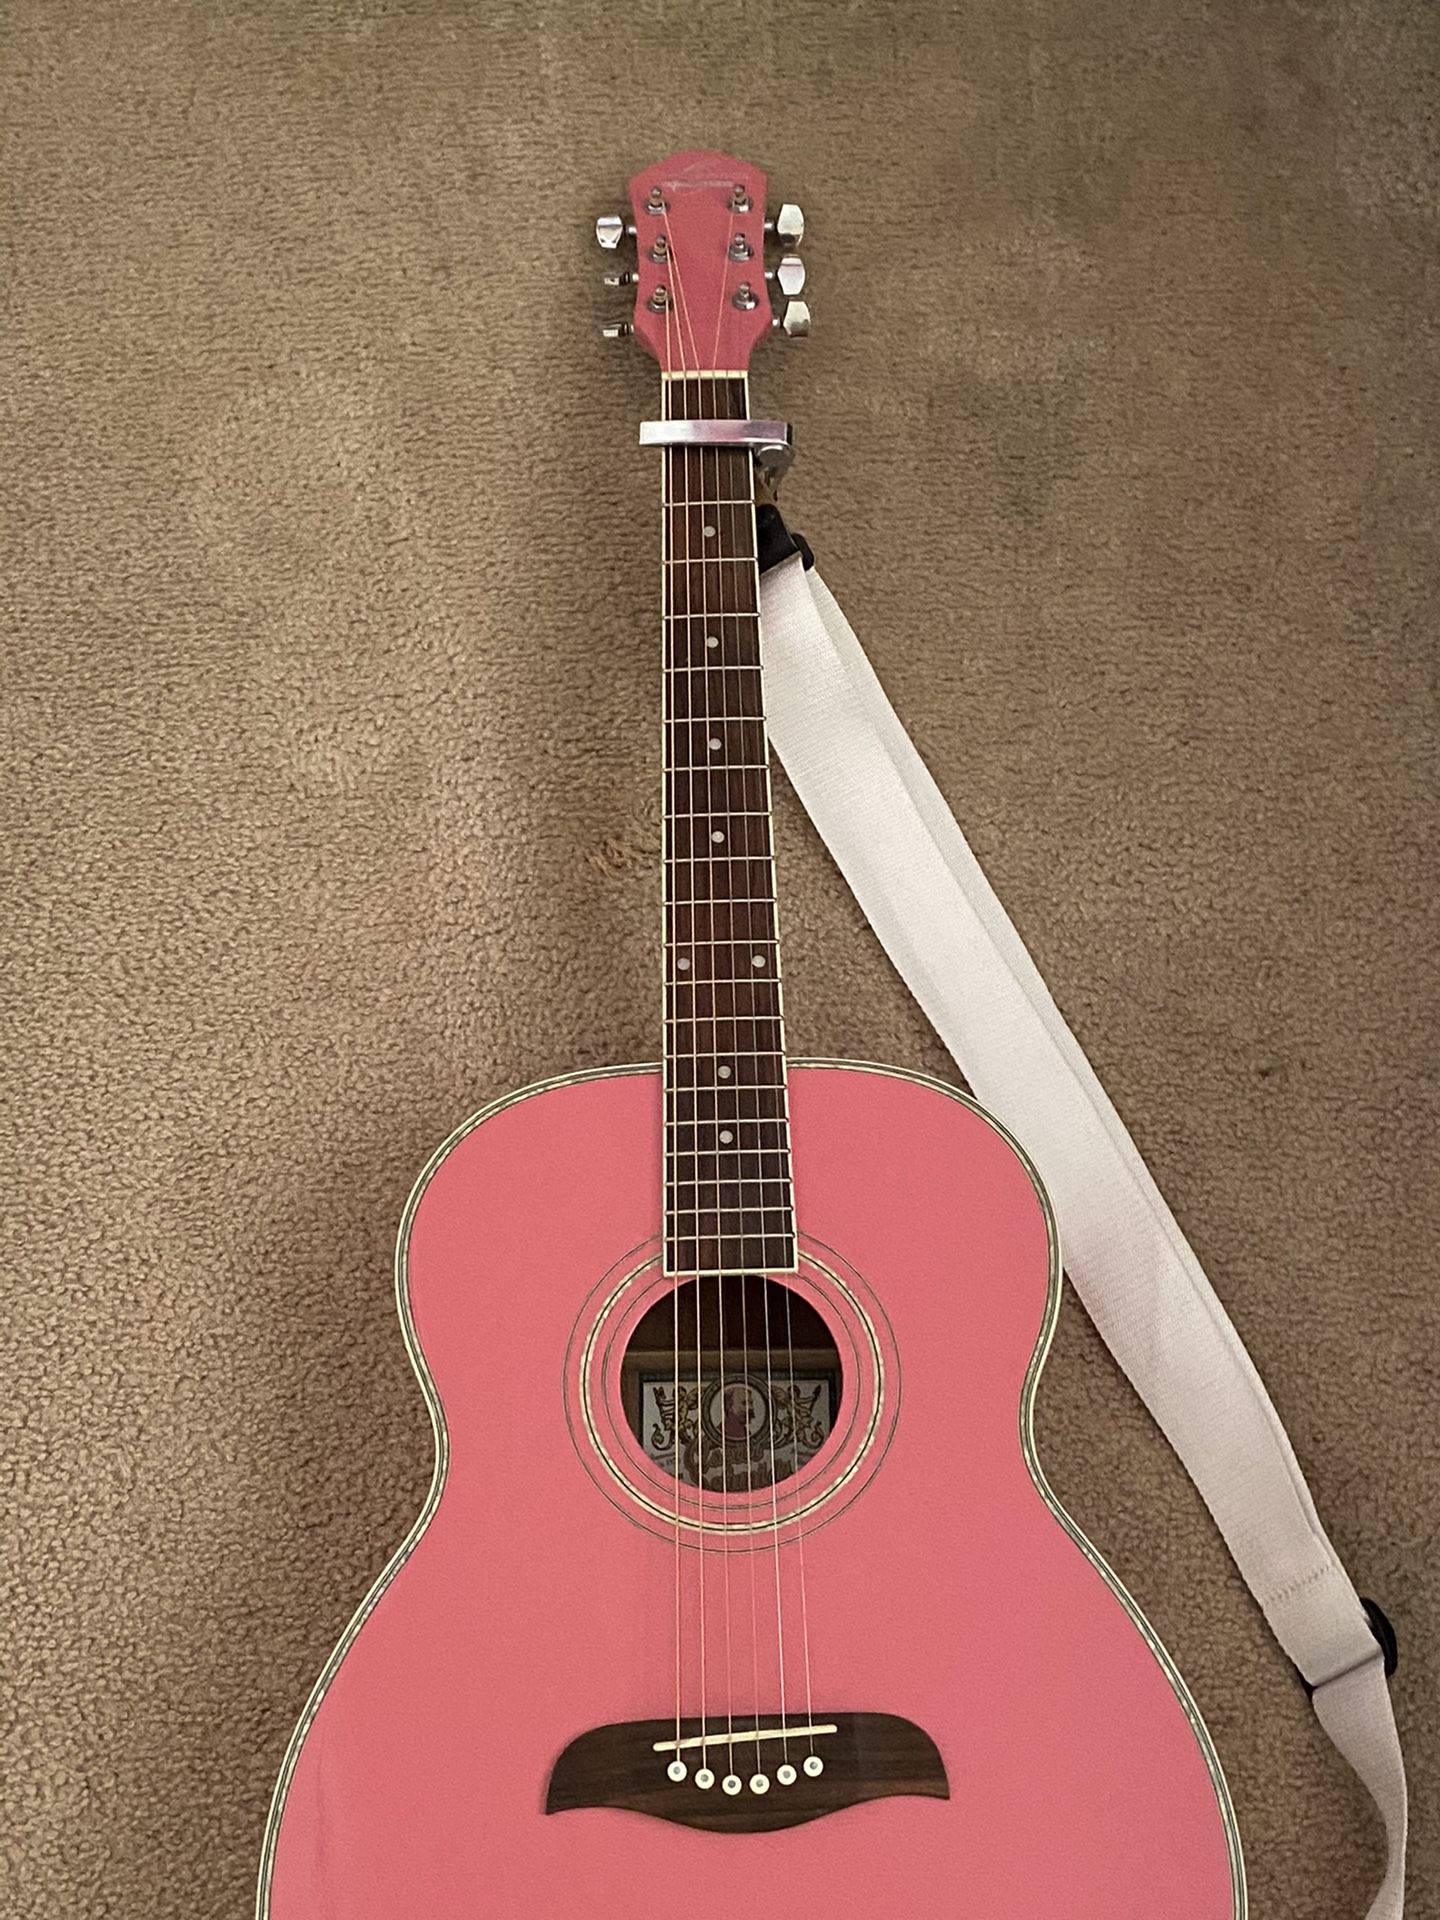 New / Never used Oscar Schmidt pink guitar with capo and strap